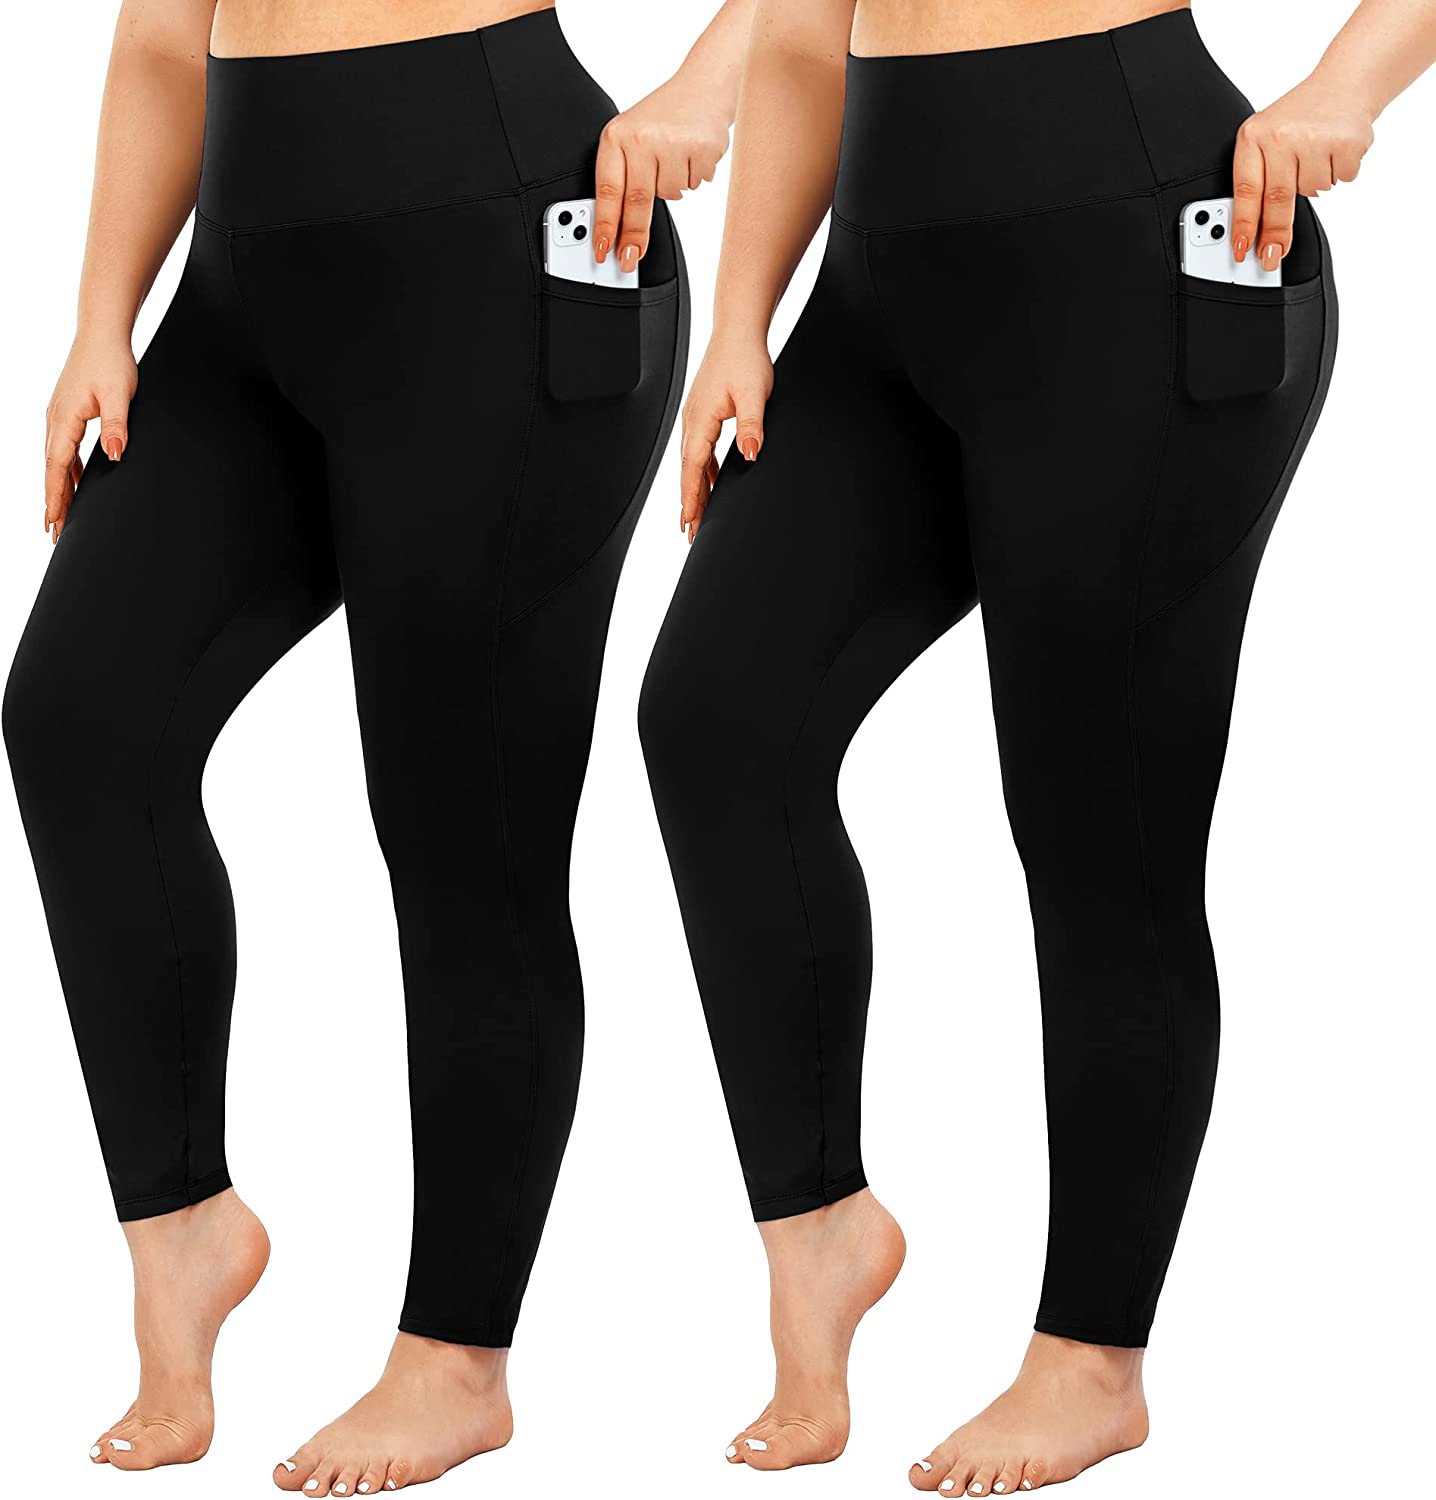 PHISOCKAT 2 Pack High Waist Yoga Pants with Pockets Tummy Control